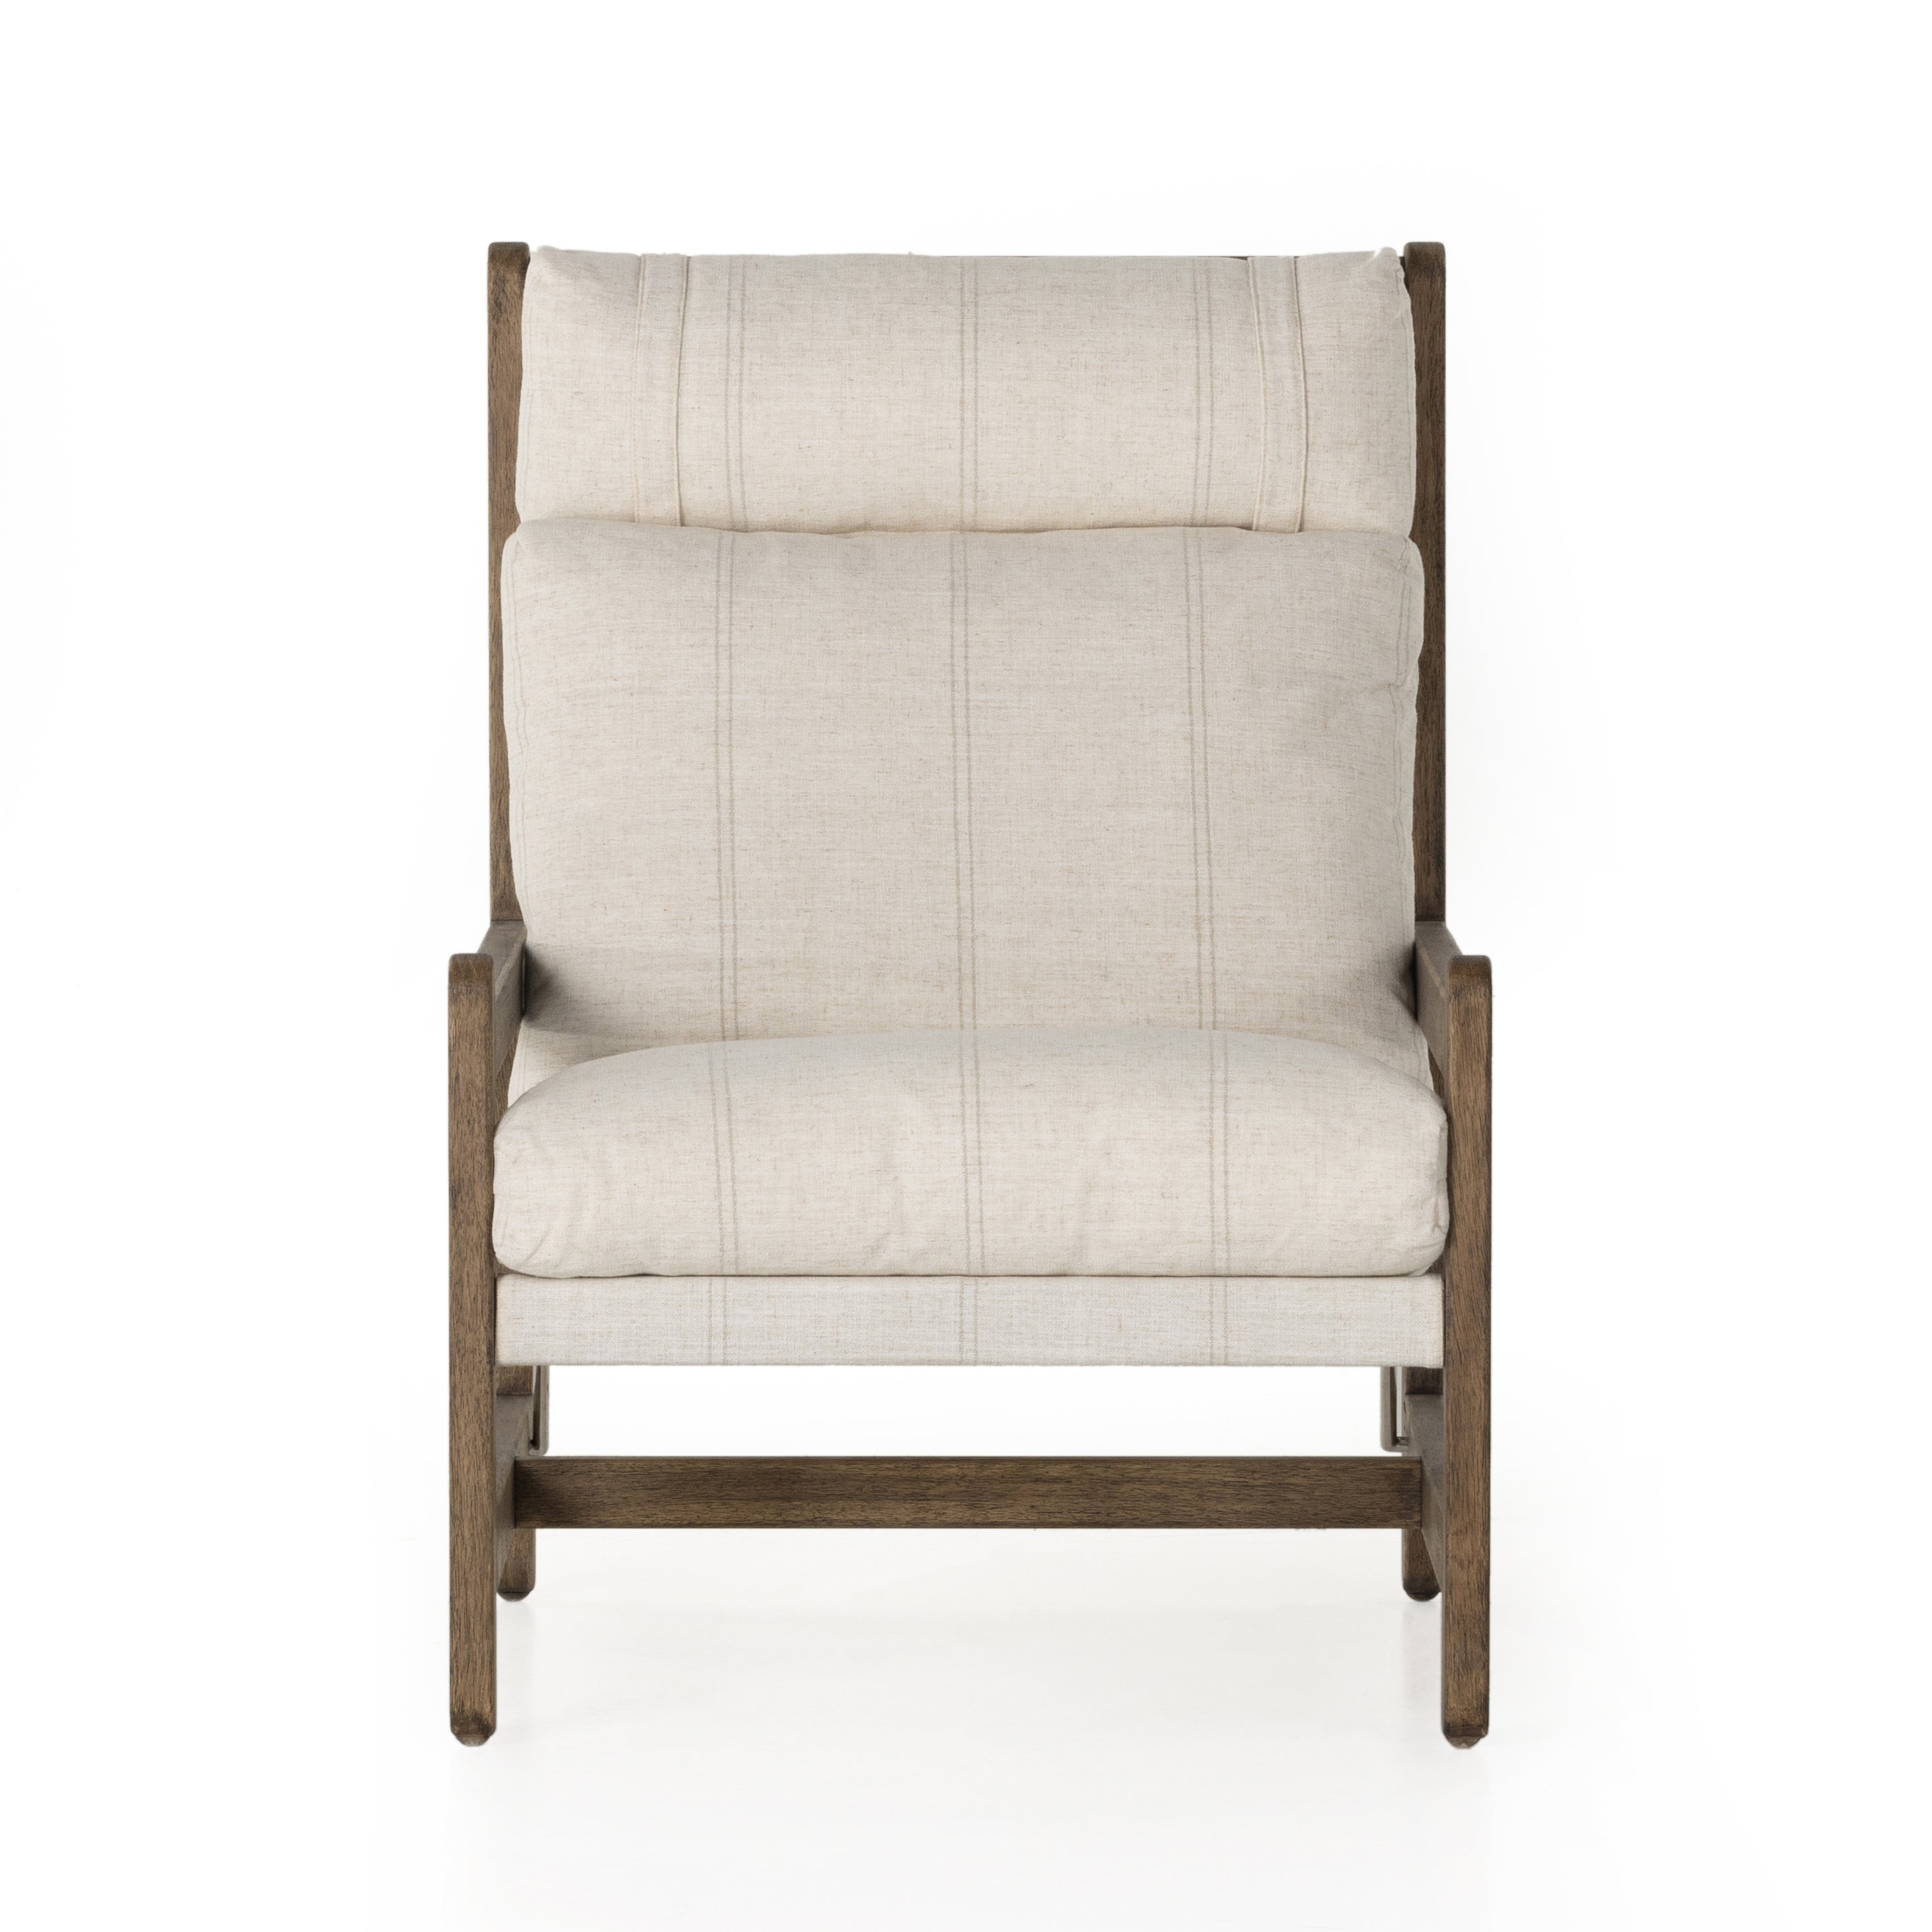 Gillespie Drummond Olive Chair is Safari styling brought to modern speed. Solid wire-brushed parawood frames cushy seating made from mindfully made materials. Amethyst Home provides interior design services, furniture, rugs, and lighting in the Monterey metro area.